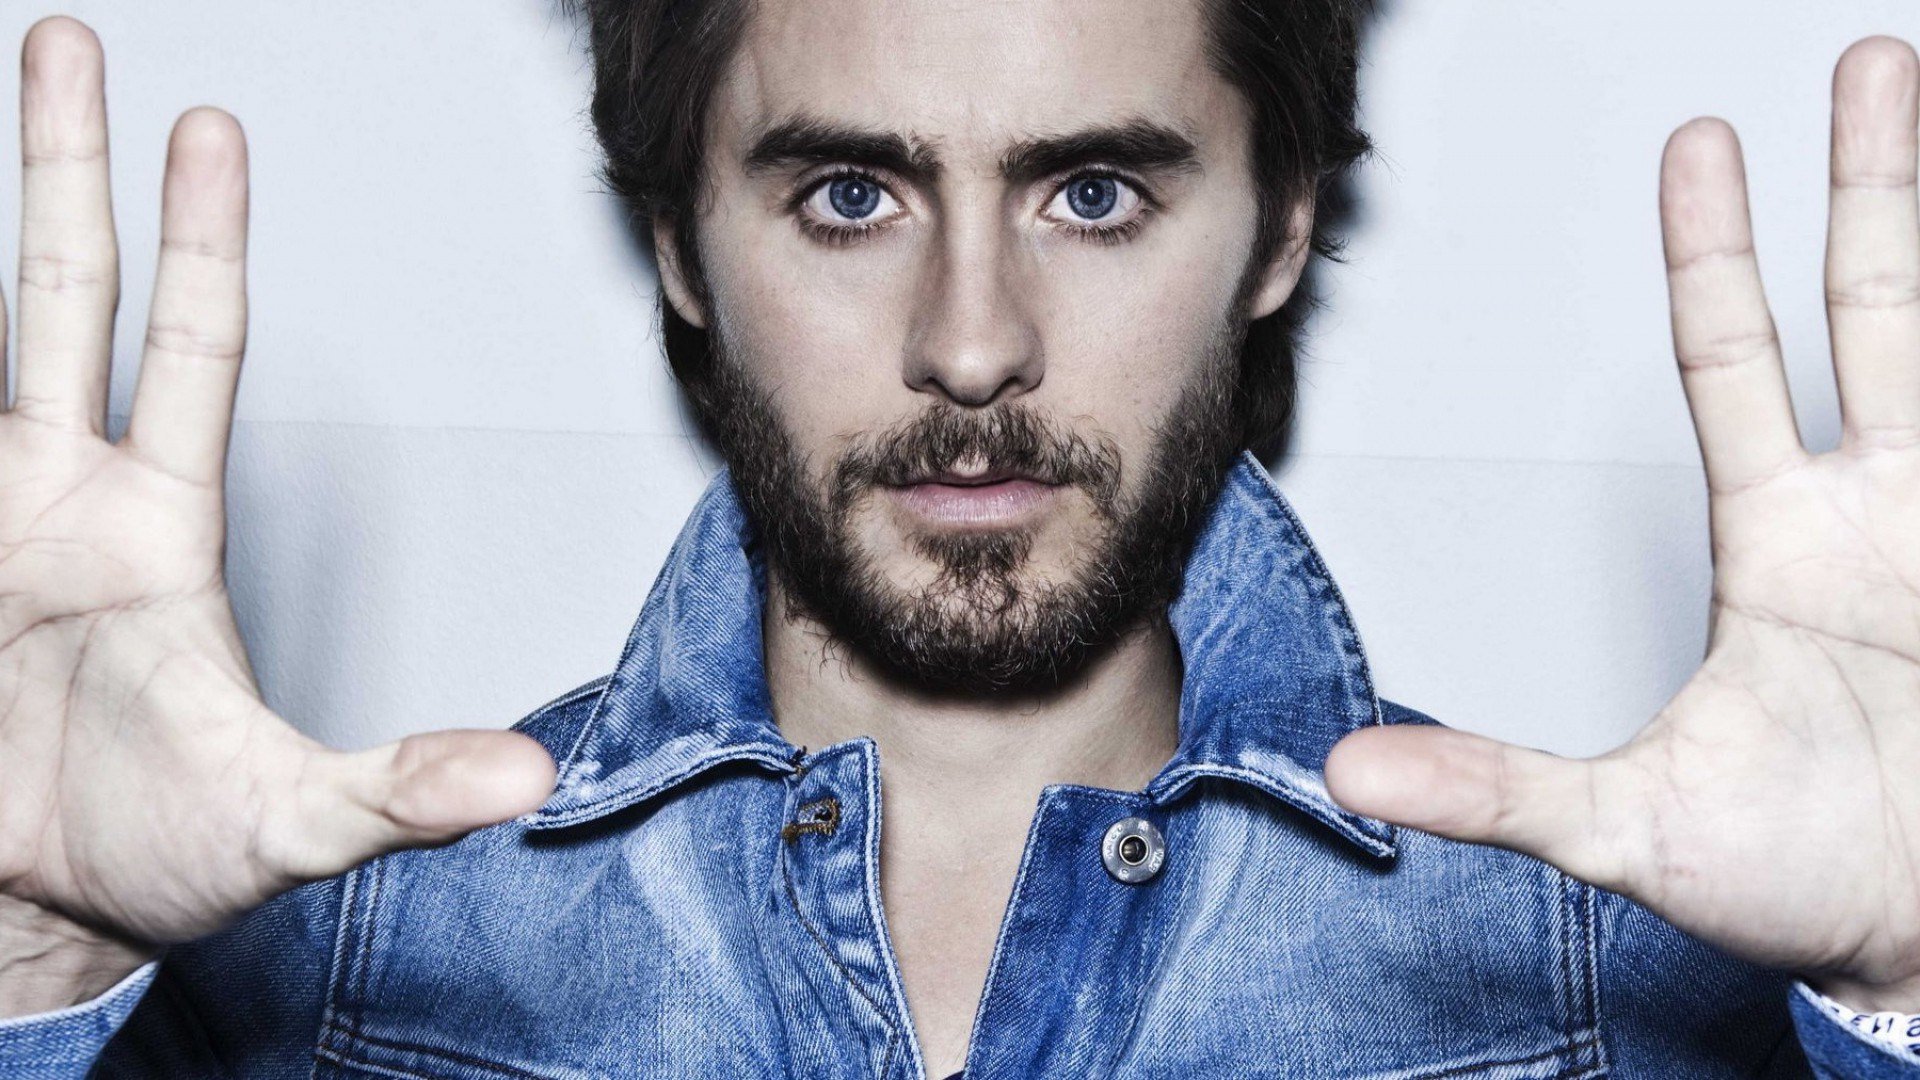 Jared Leto Wallpaper Image Photos Pictures Background